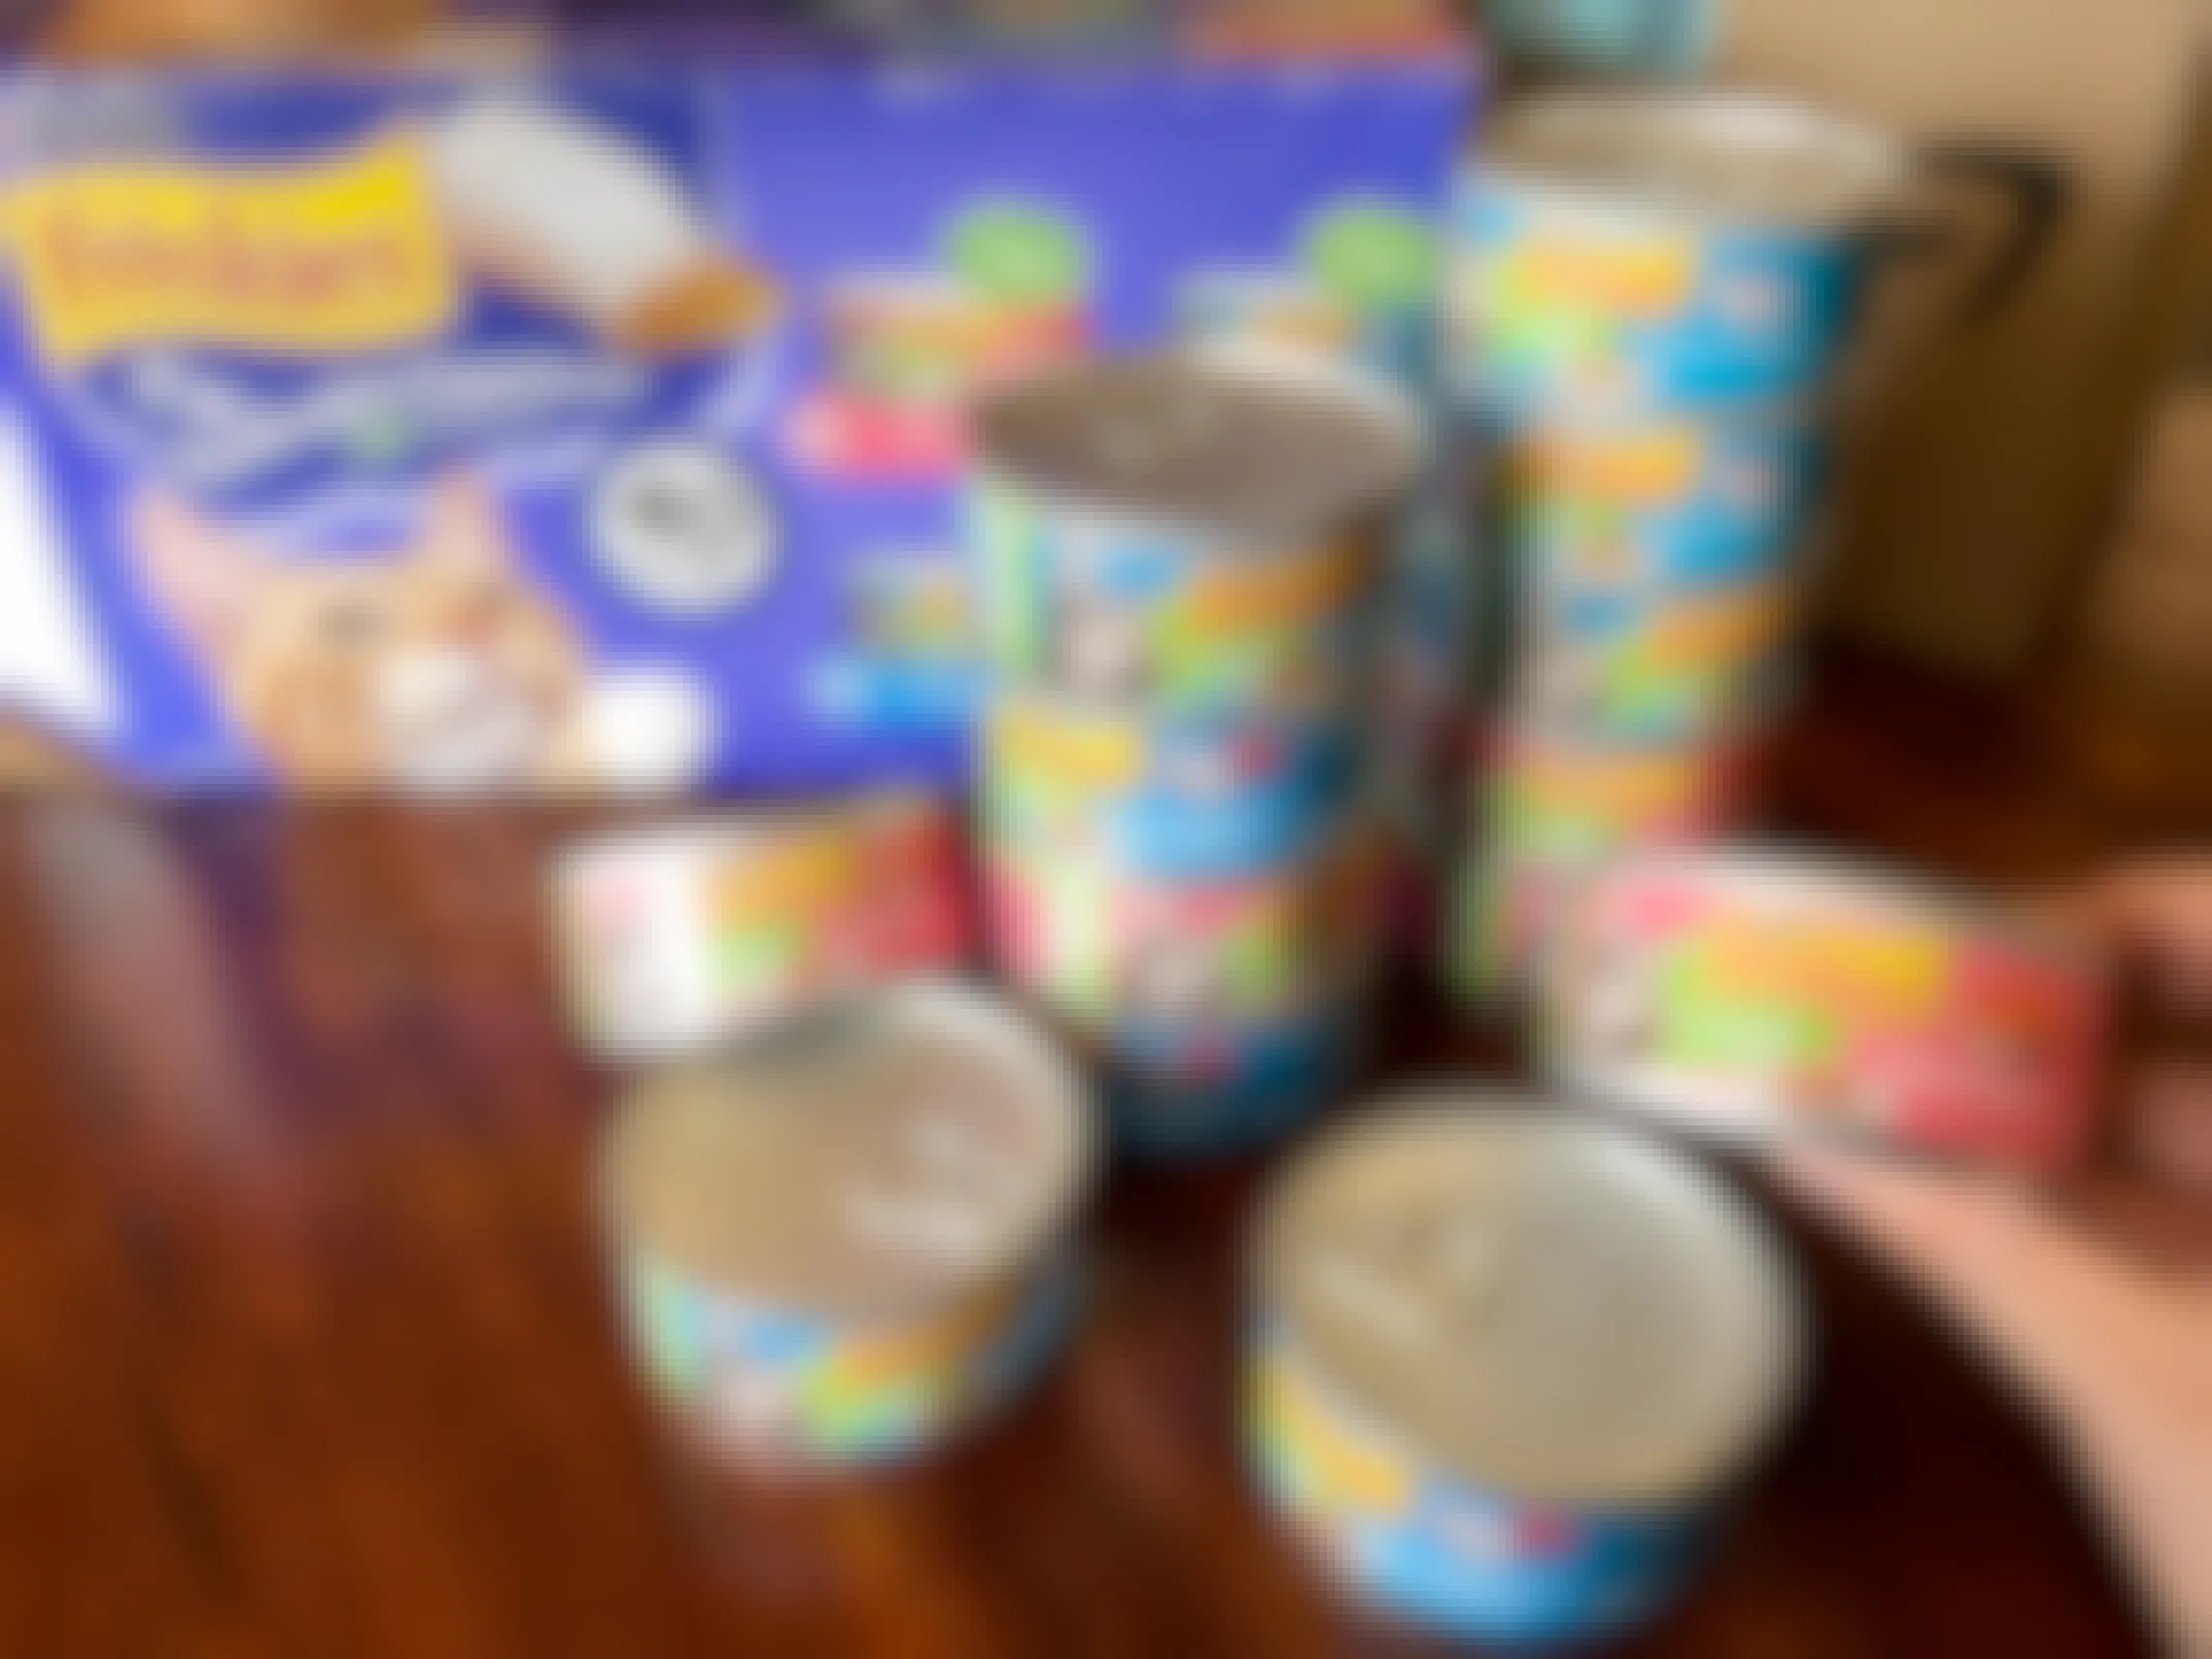 A person's hand holding up a can of Friskies wet cat food next to a stack of more Friskies cans and their box.